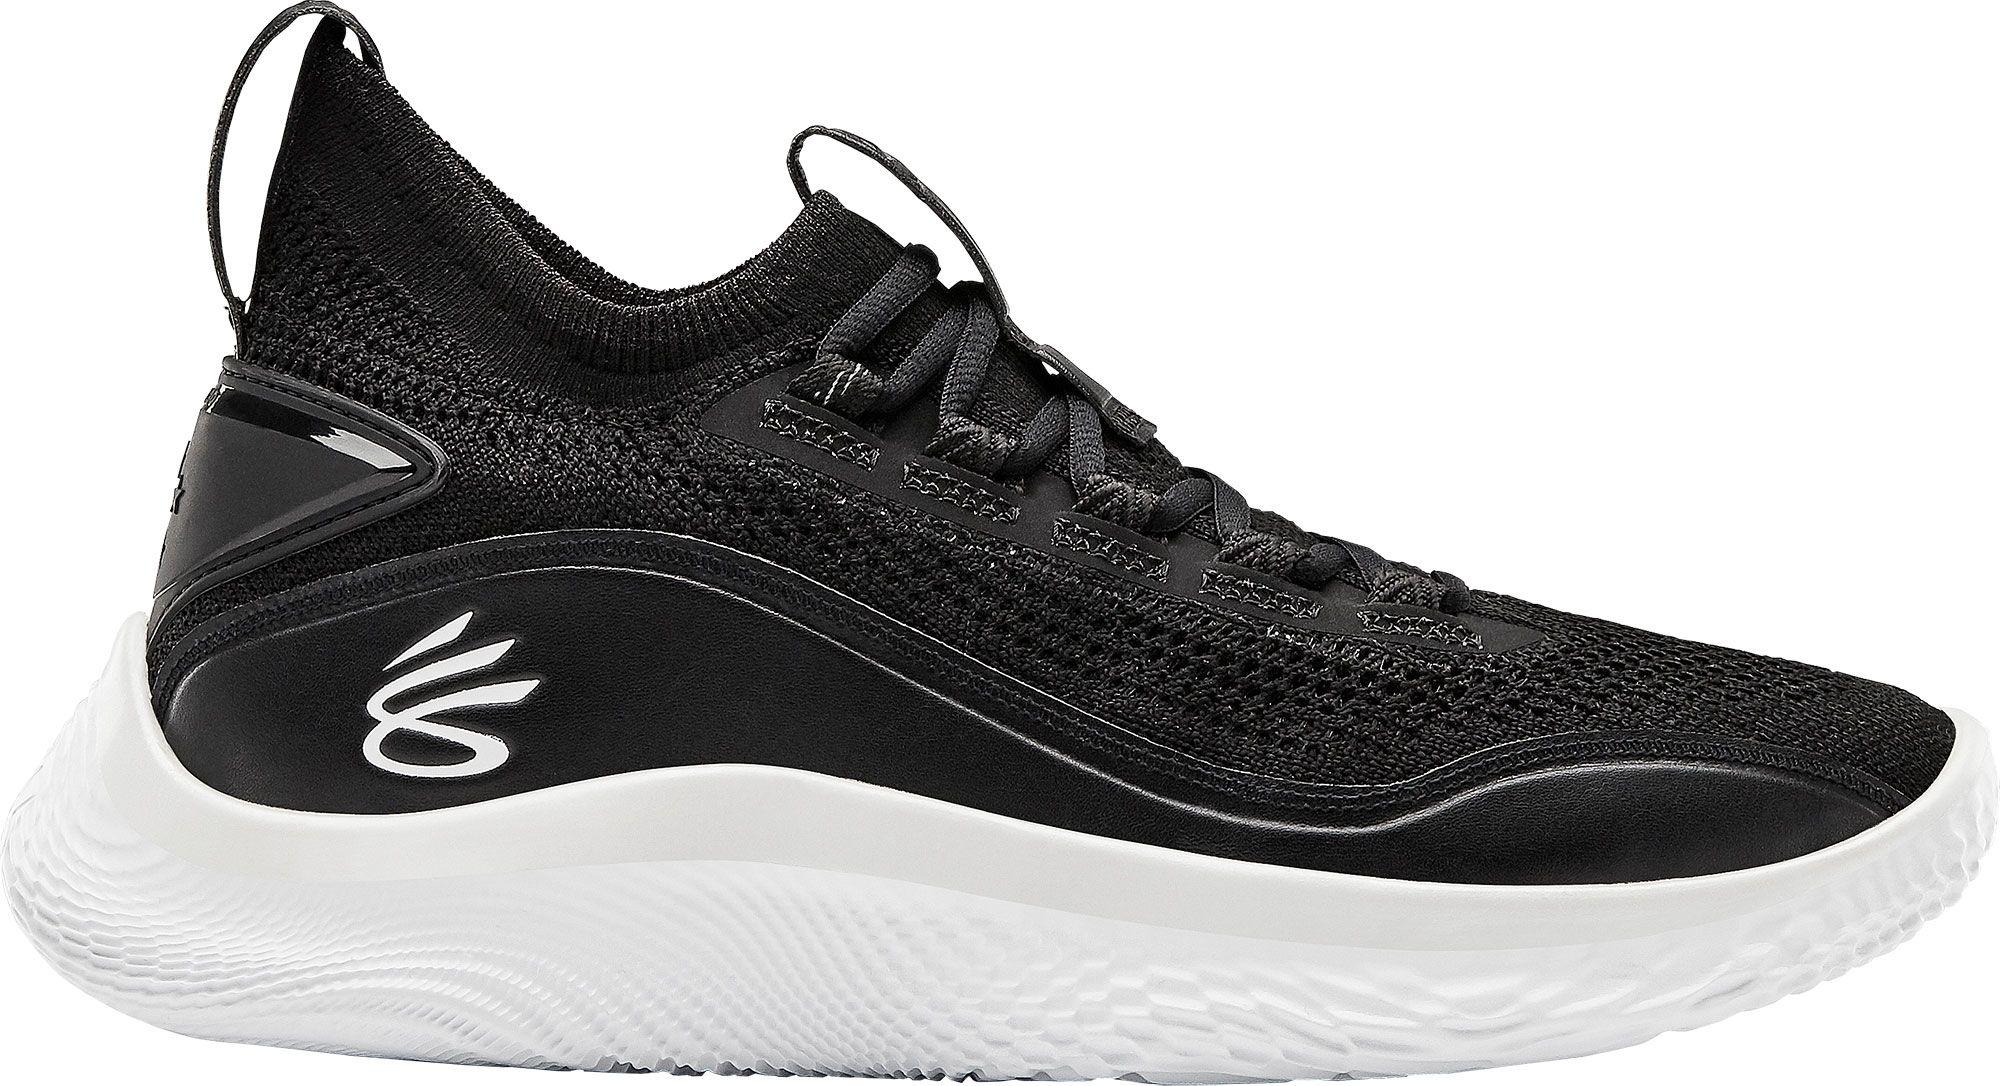 Under Armour Curry Flow 8 Basketball Shoes in Black for Men - Lyst